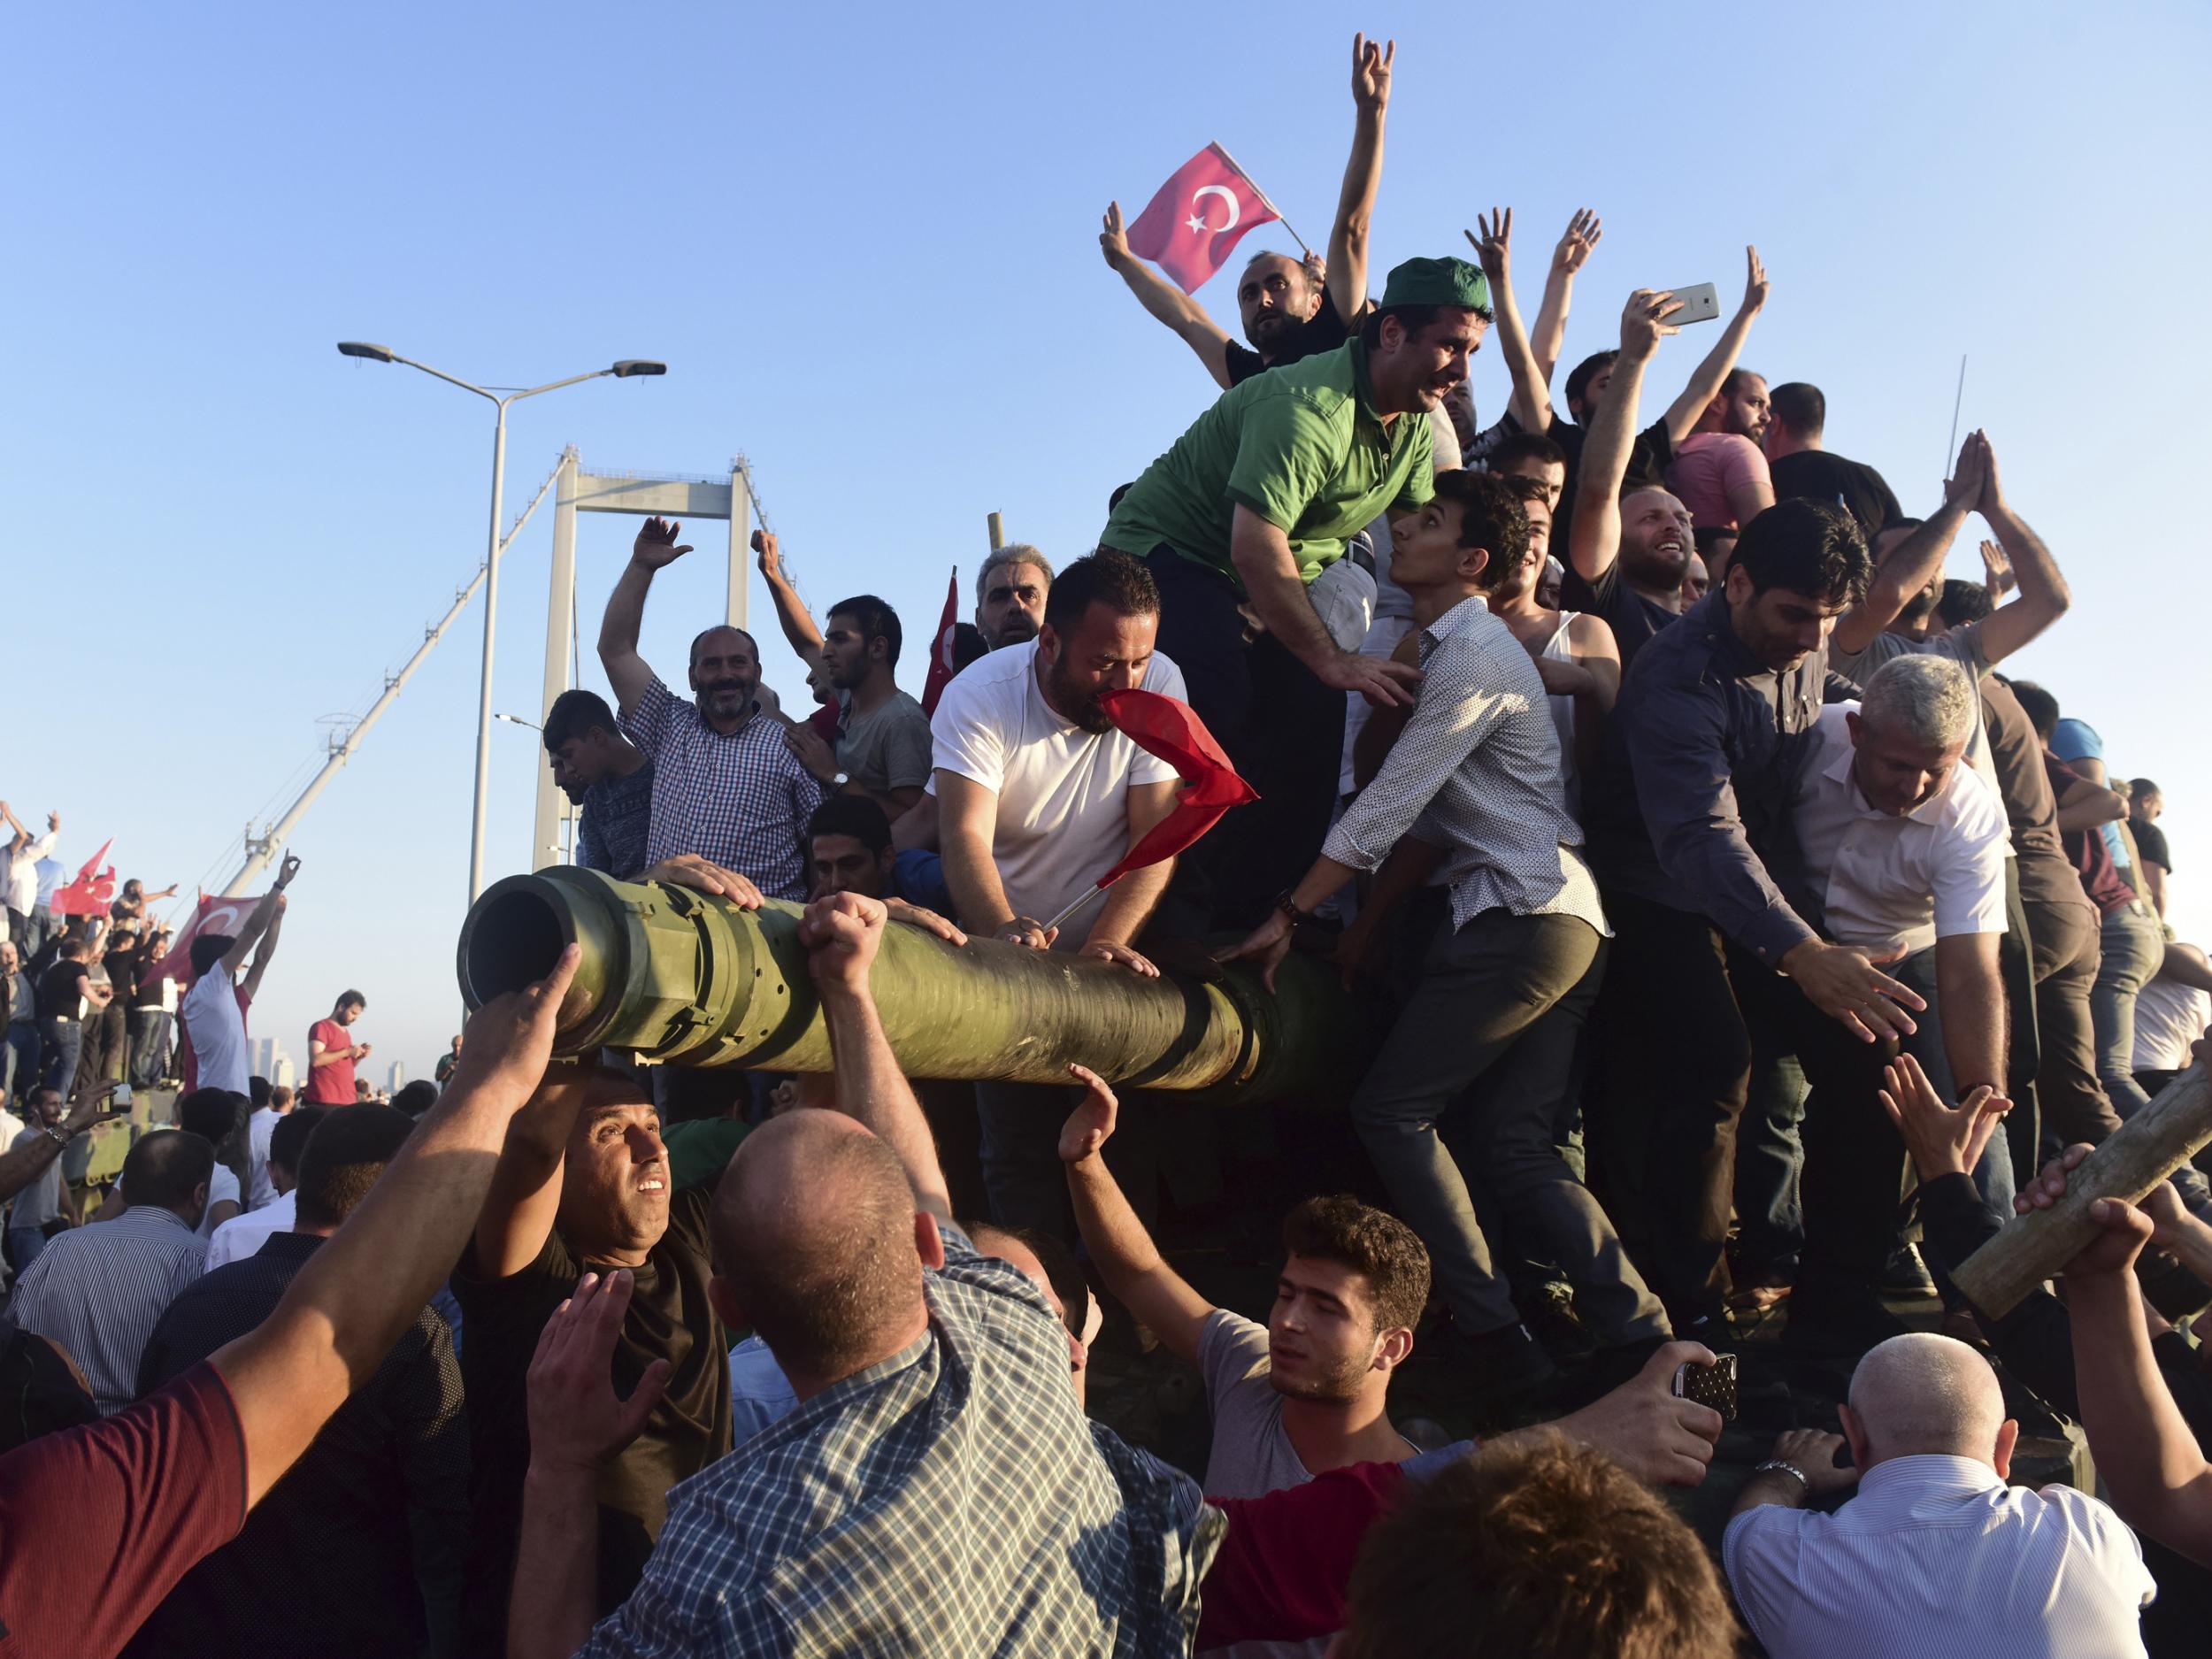 Supporters of Turkish President Recep Tayyip Erdogan celebrate after soldiers involved in the coup surrendered on the Bosphorus Bridge in Istanbul on 16 July 2016